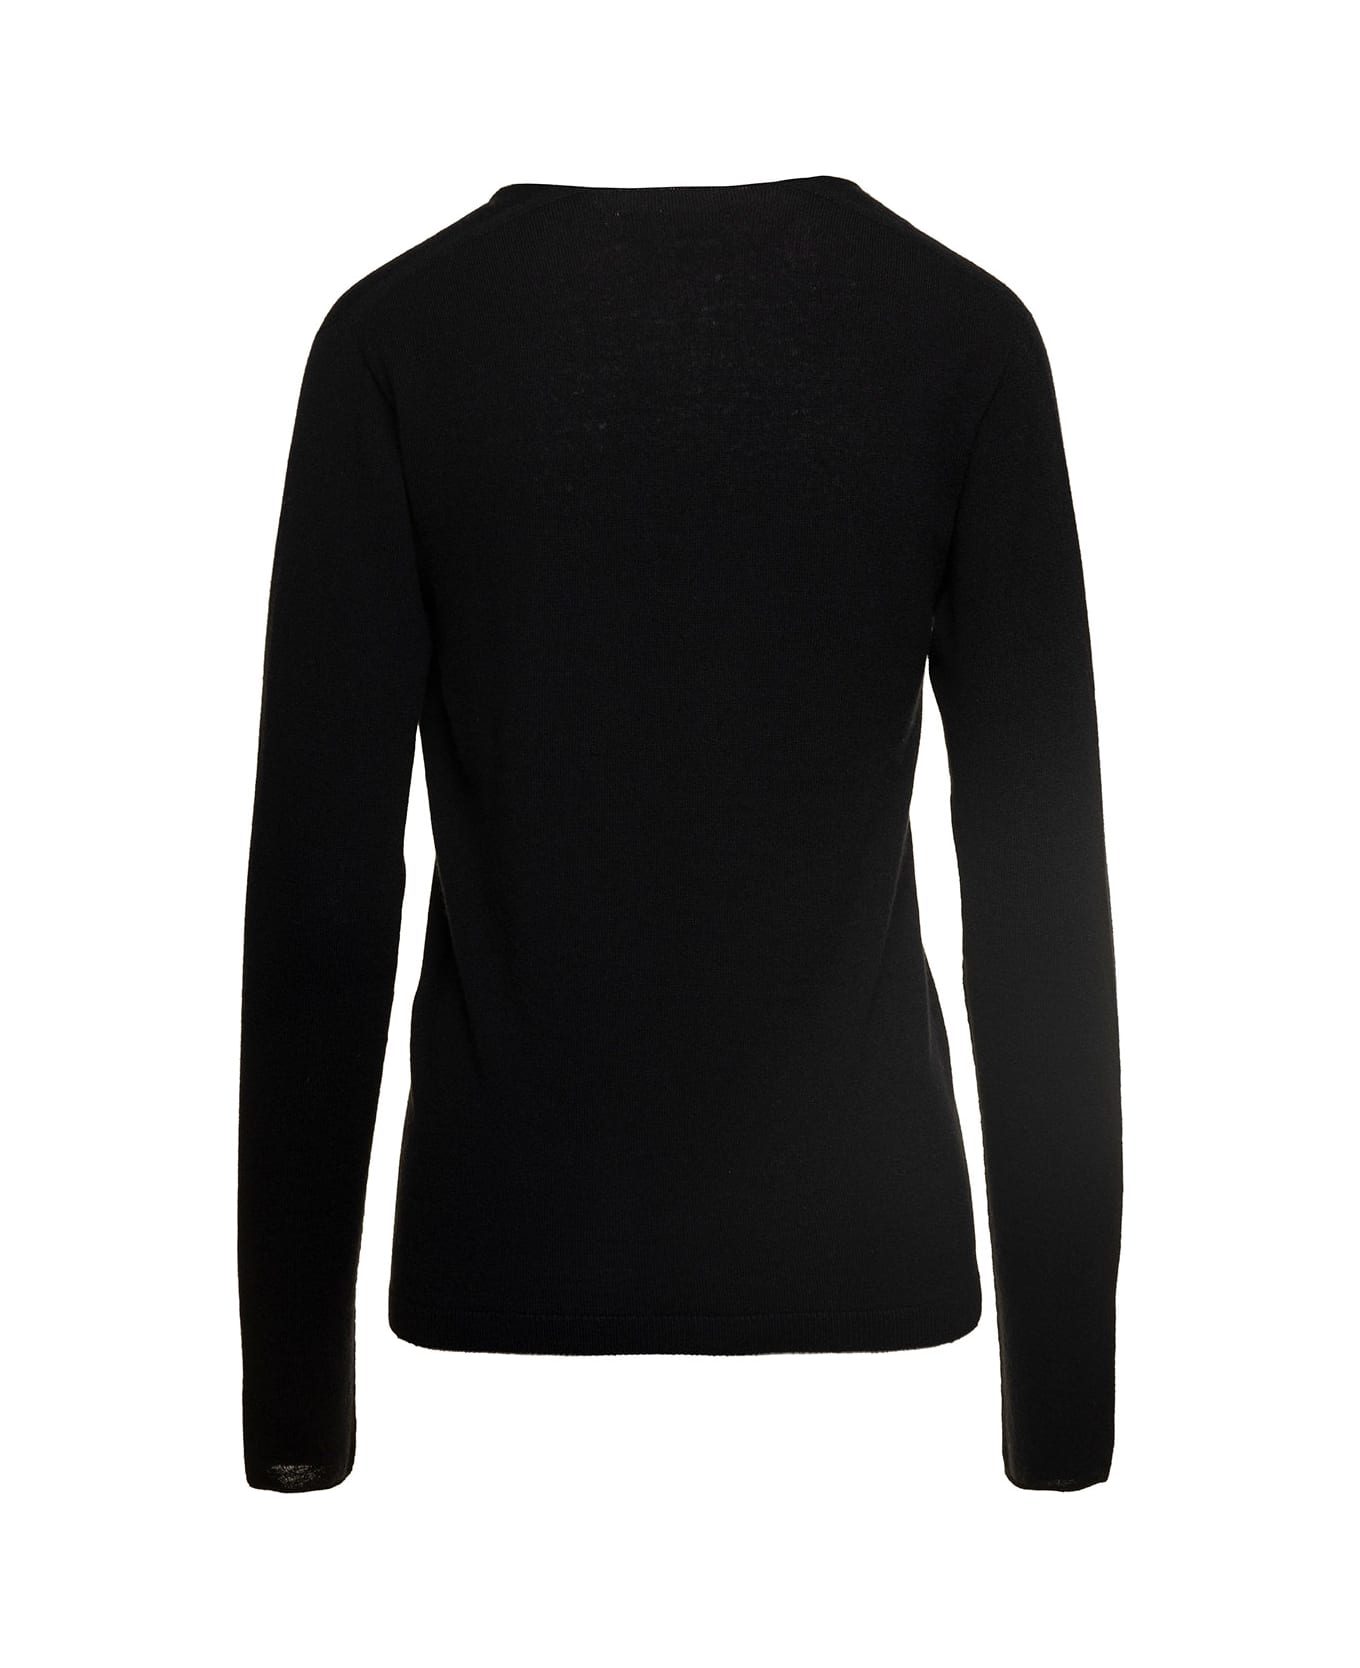 Antonelli Black Sweater With V Neckline In Wool And Cashmere Woman - Black